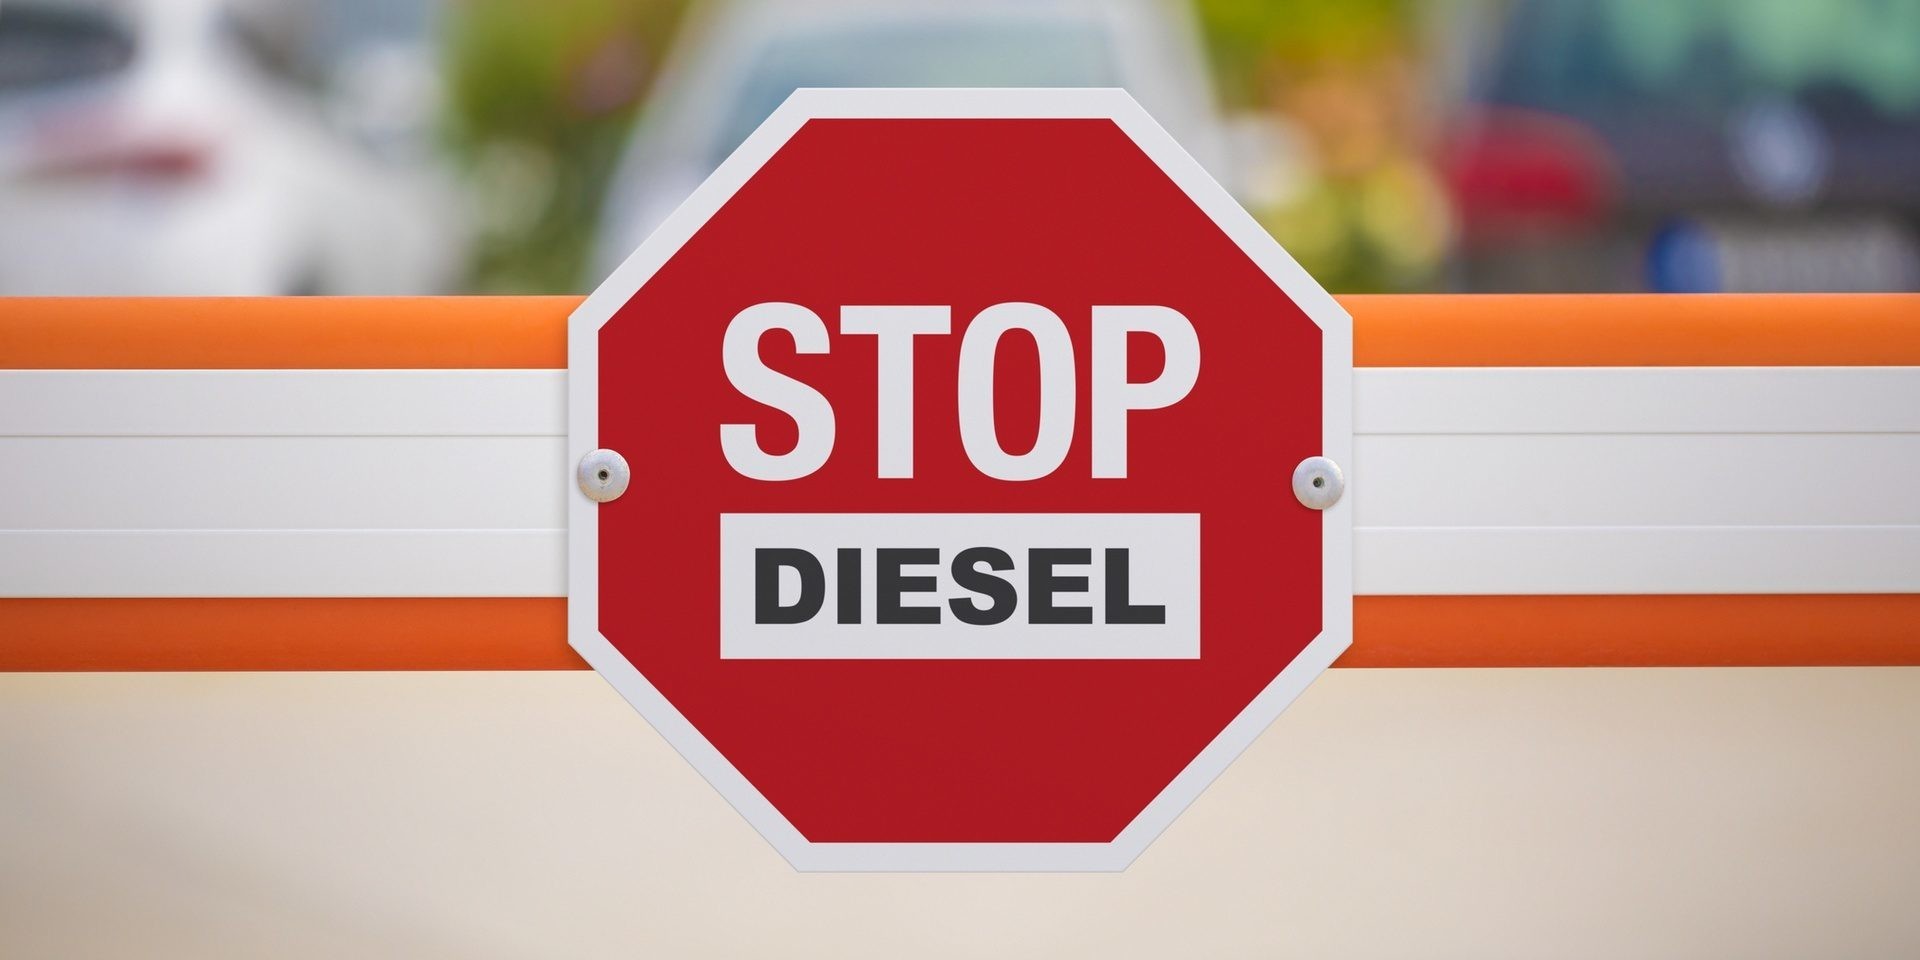 Welcome to the post-diesel era. And now what?